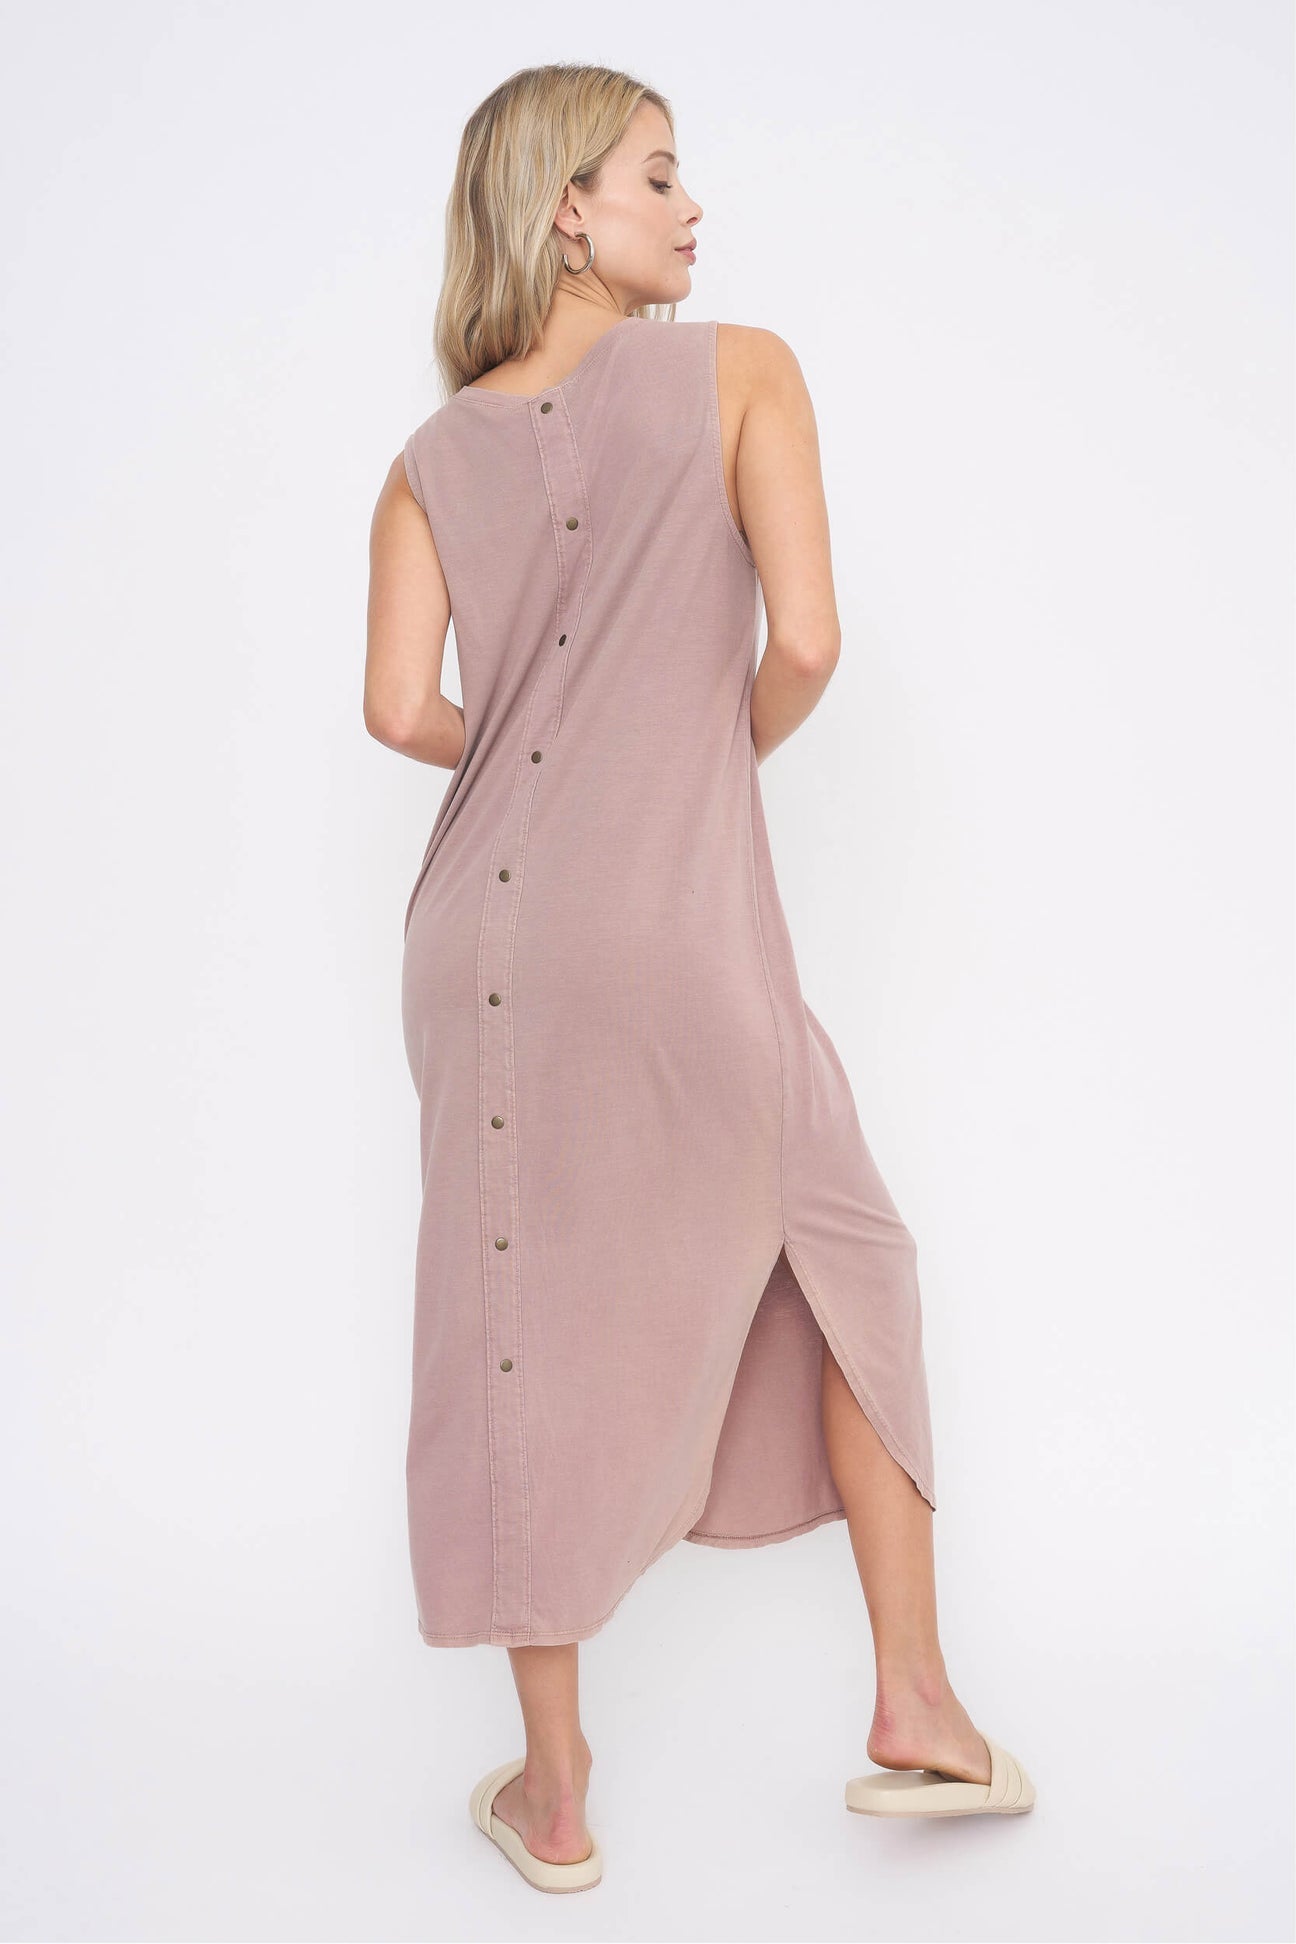 Project Social T- Snap out of it tank dress-DW Mojave Mauve